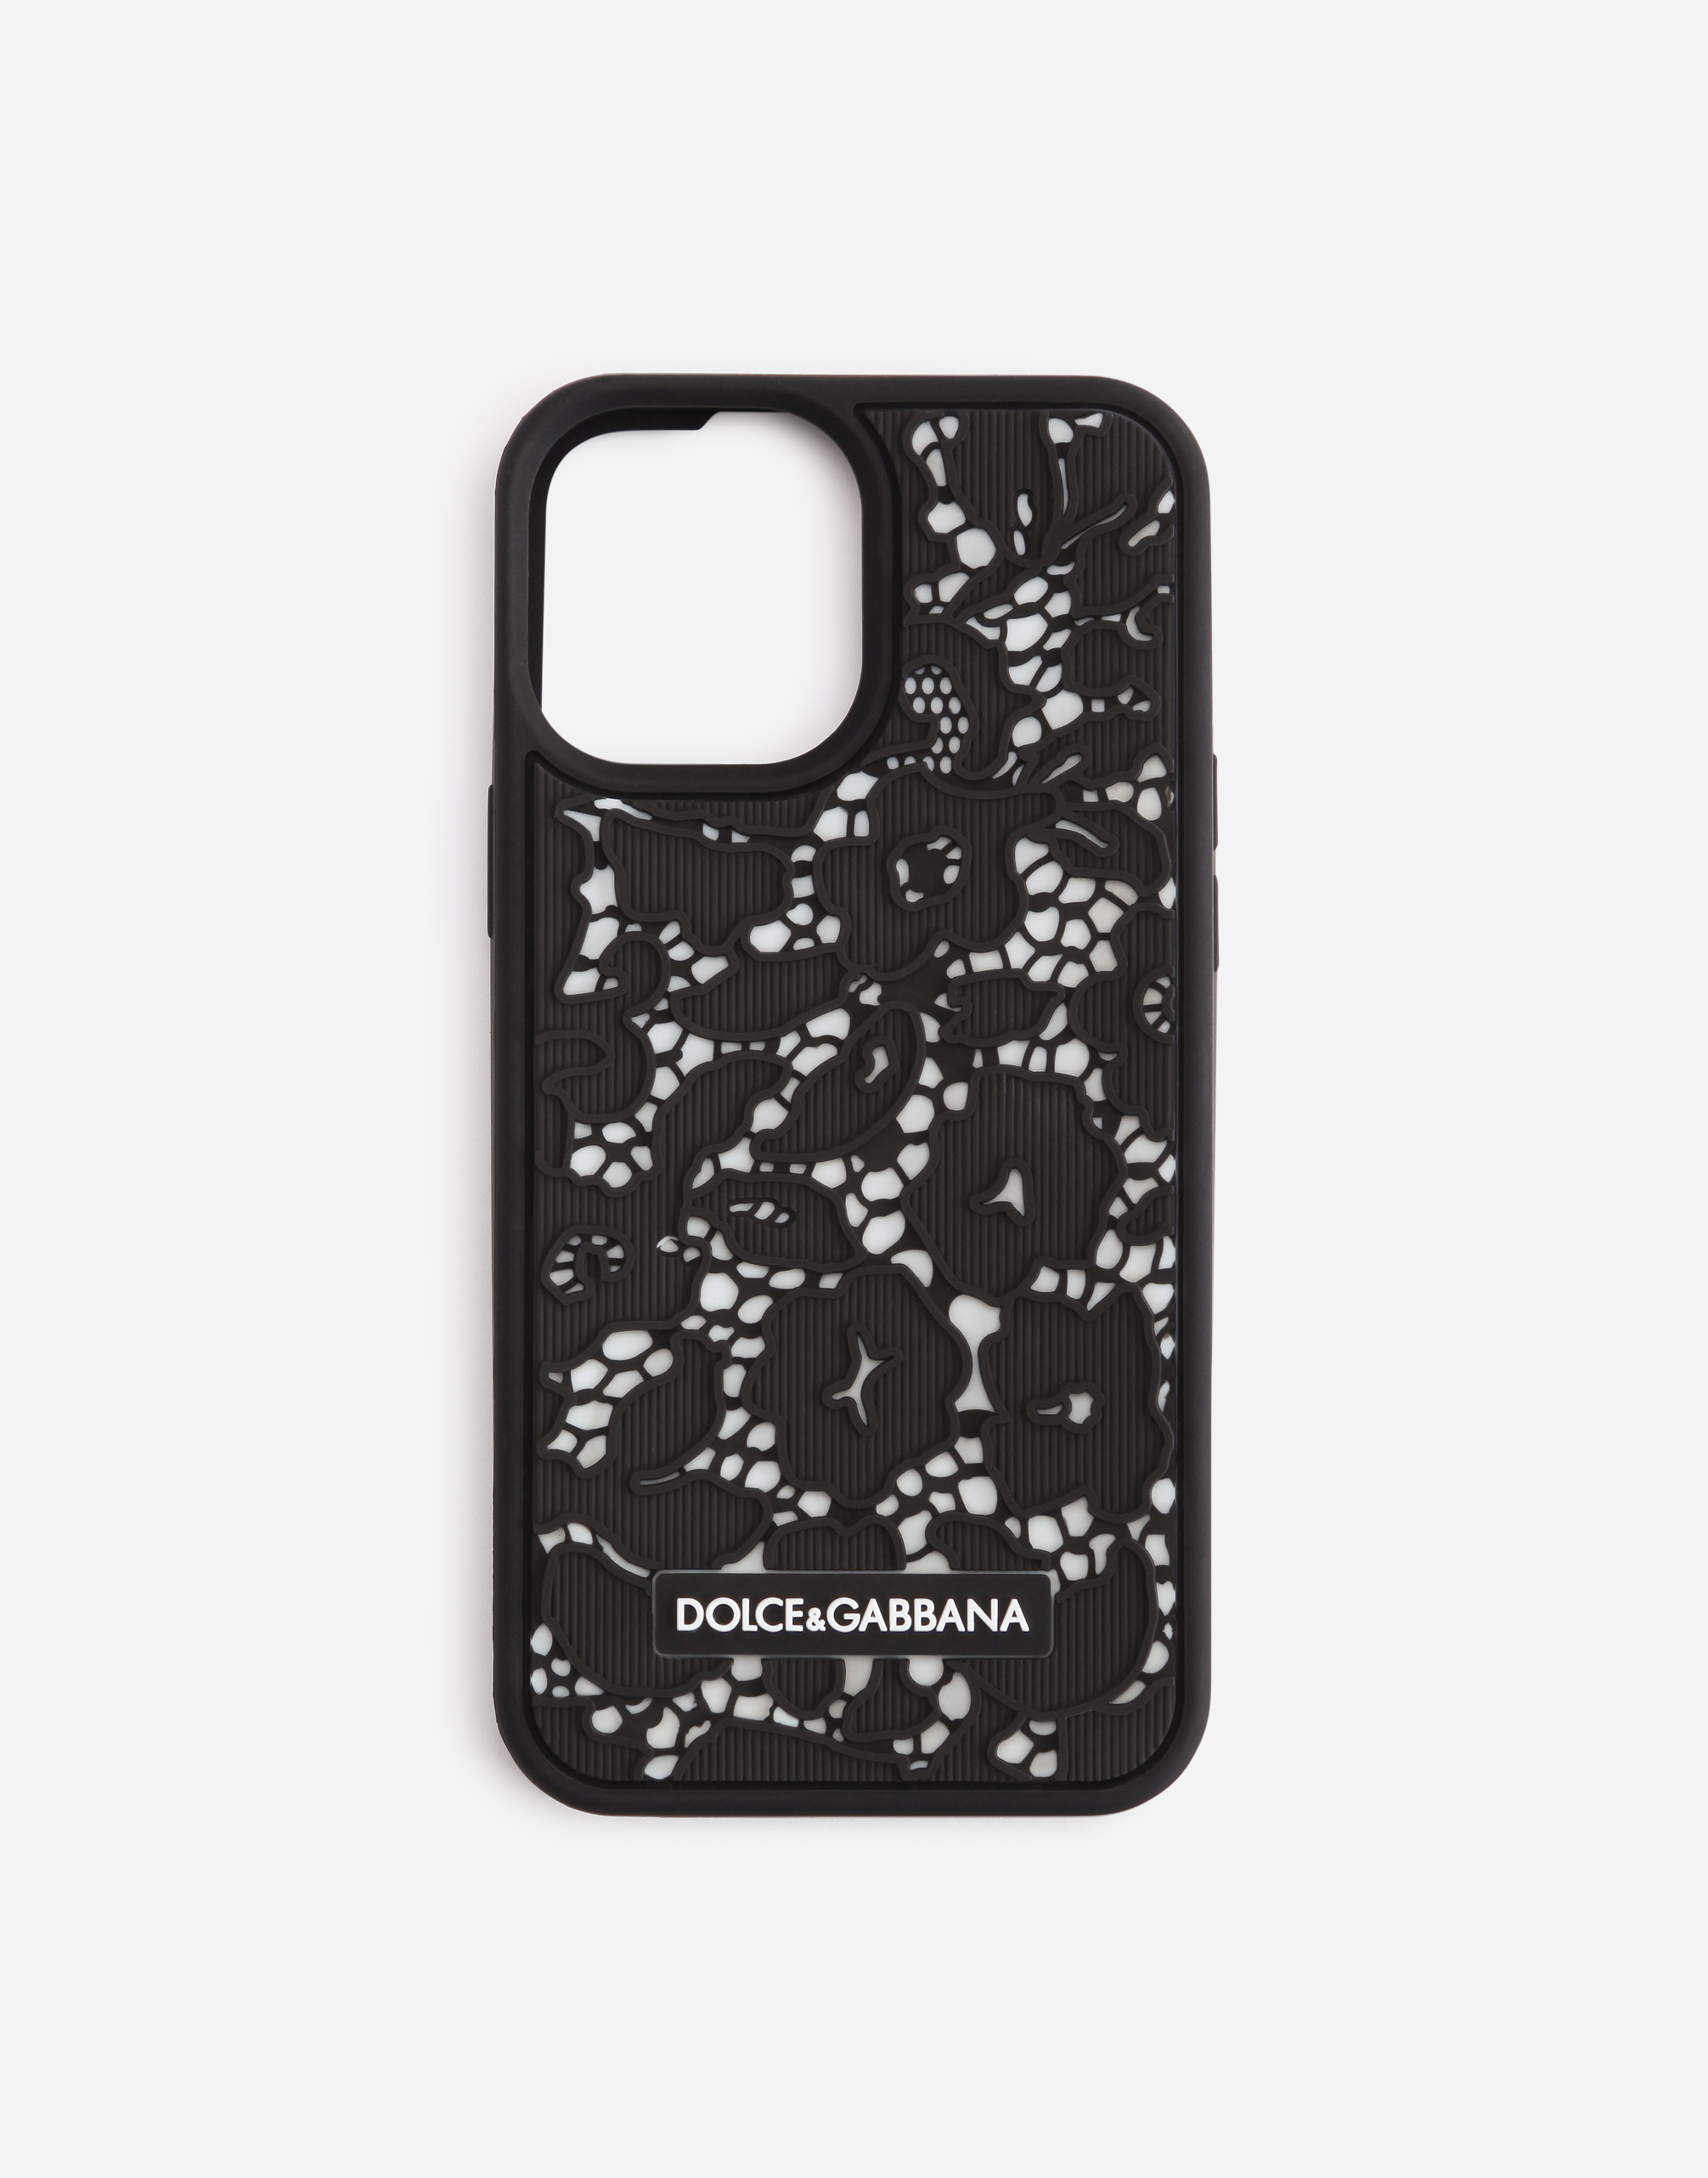 Lace rubber iPhone 12 Pro max cover in Black/White